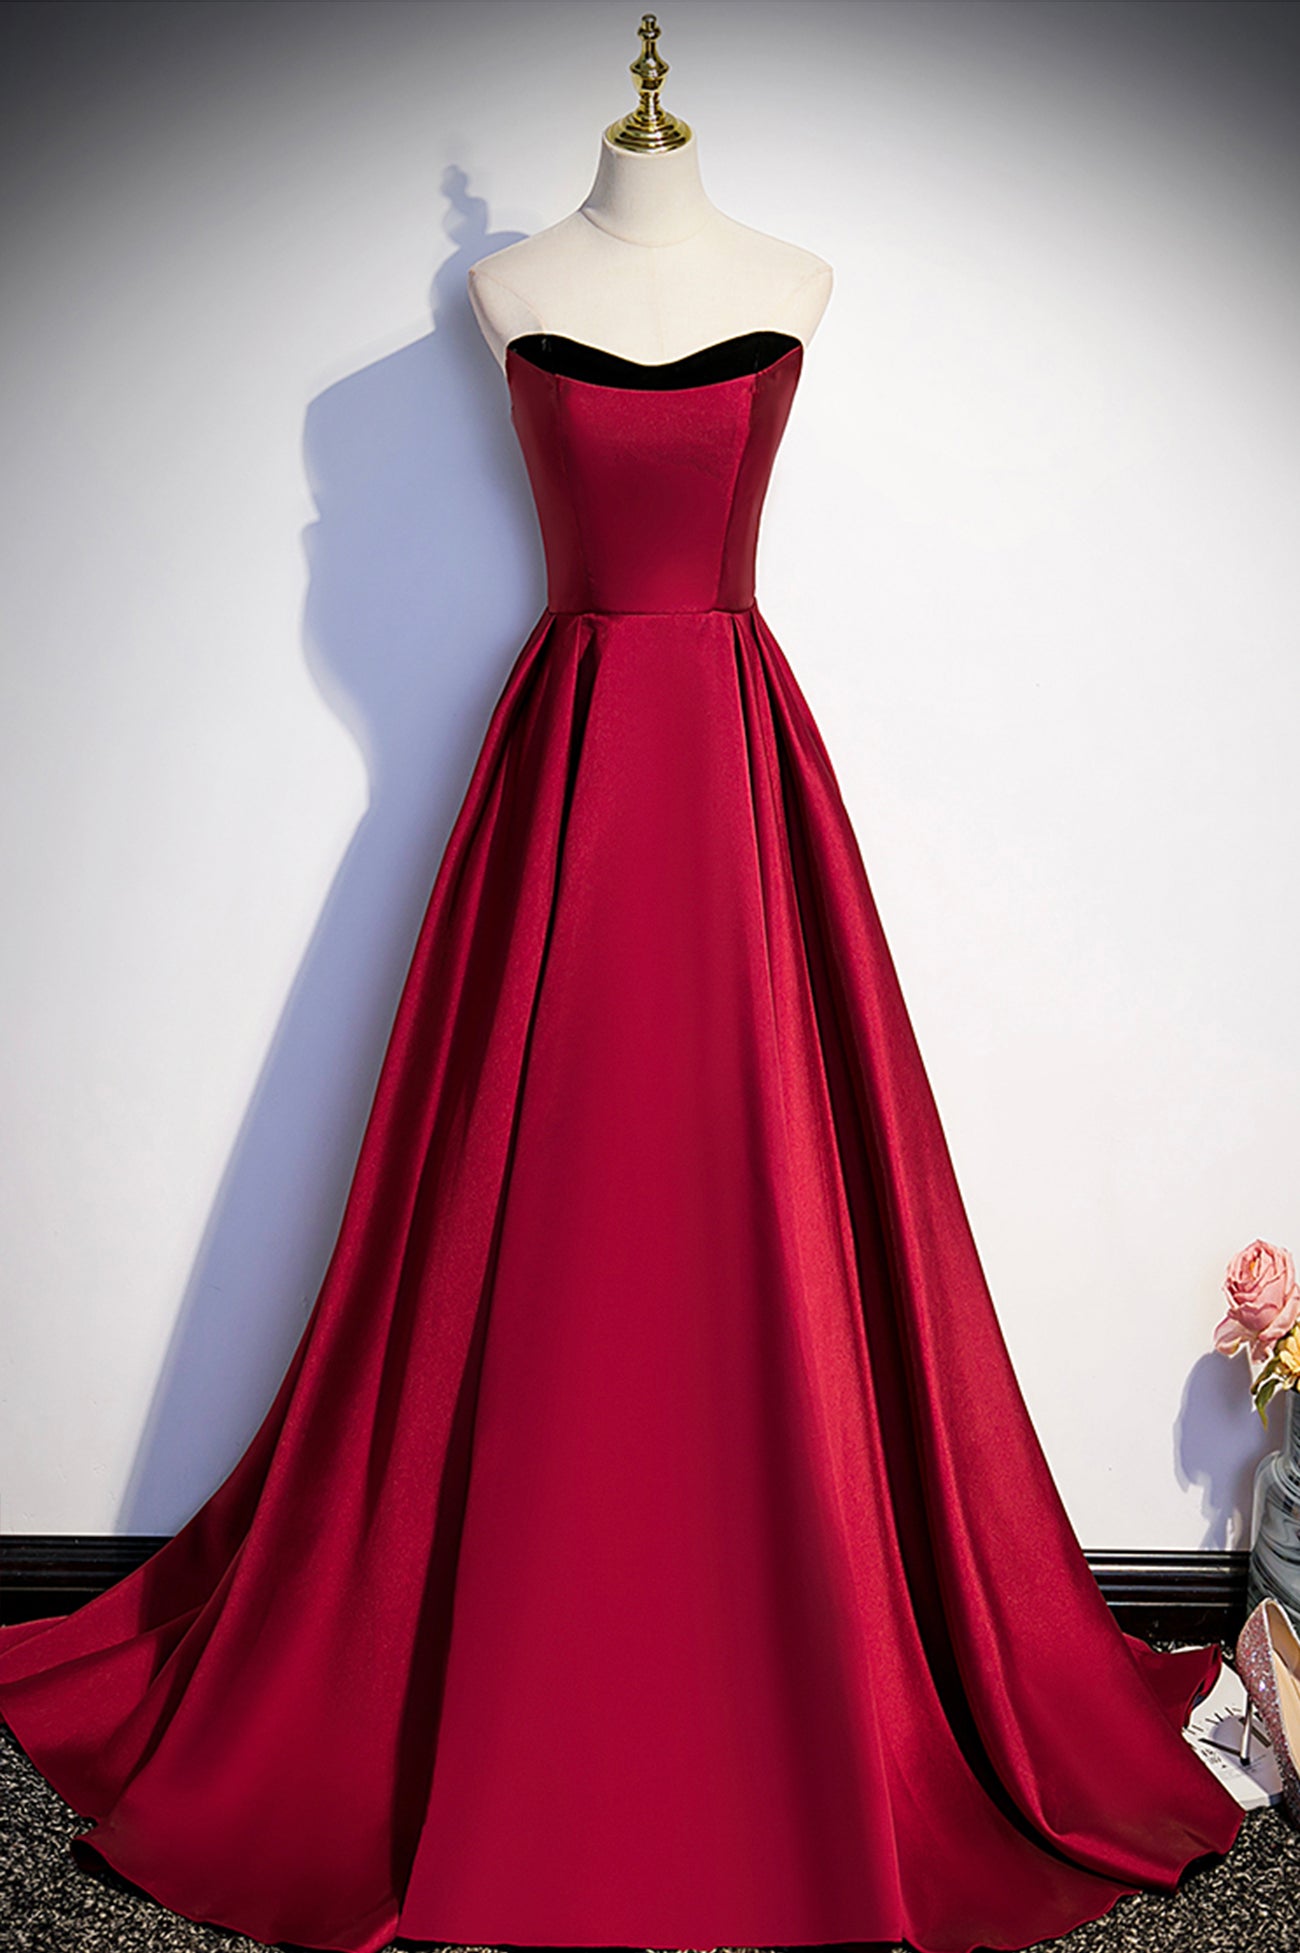 Burgundy Satin Long Prom Dress, Simple A-Line Evening Party Dress